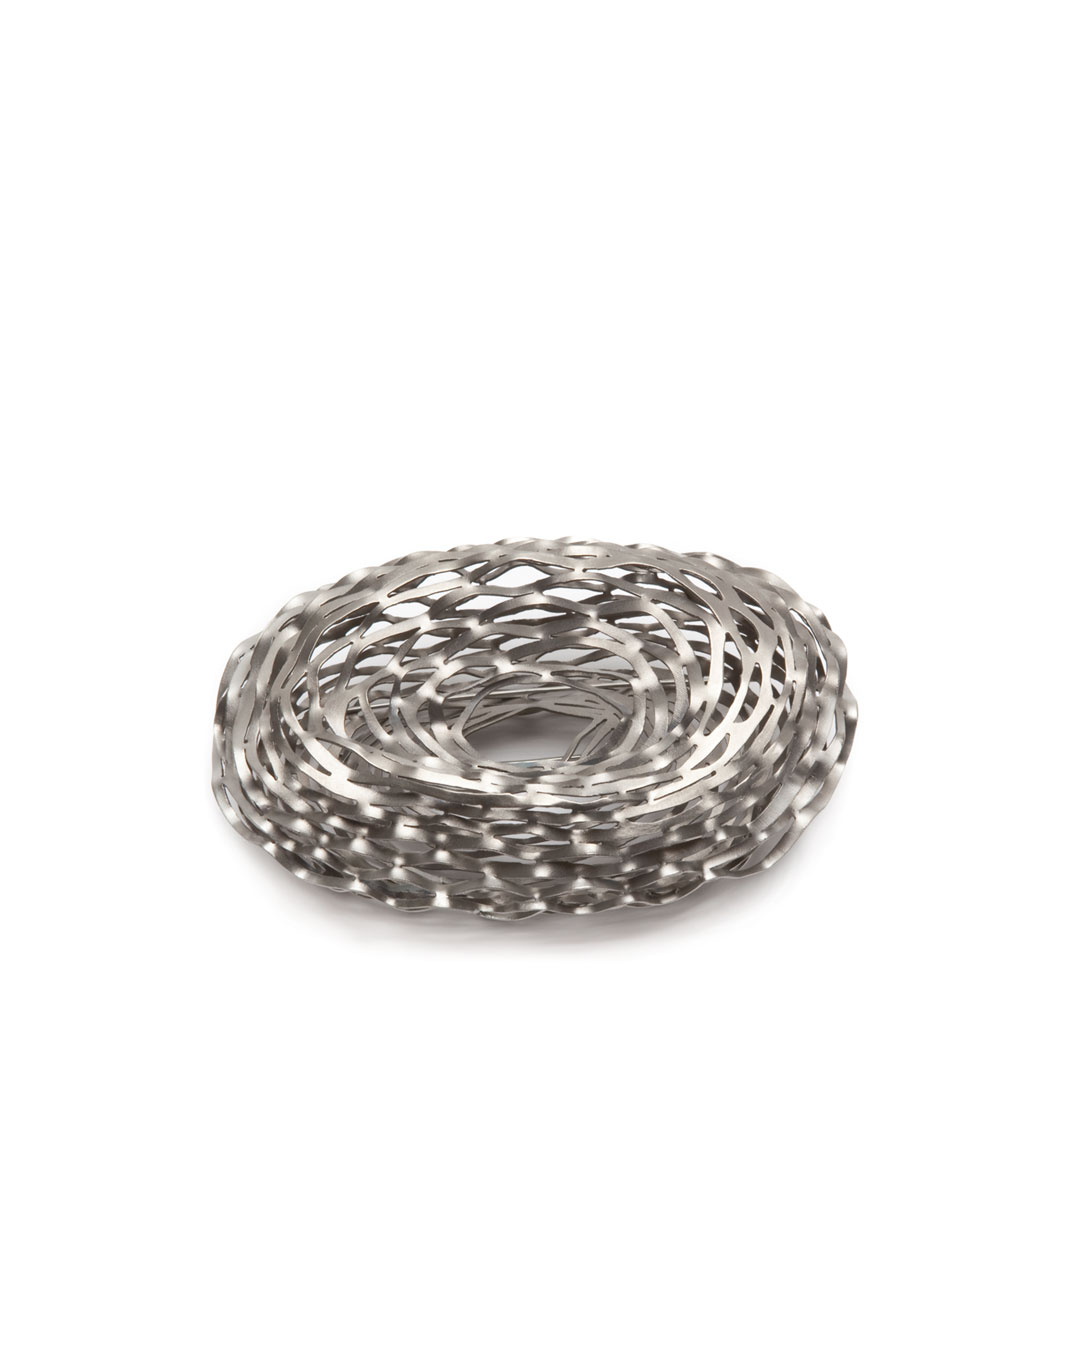 Antje Bräuer, untitled, 2010, brooch; titanium, stainless steel, 79 x 120 x 55 mm, €1020